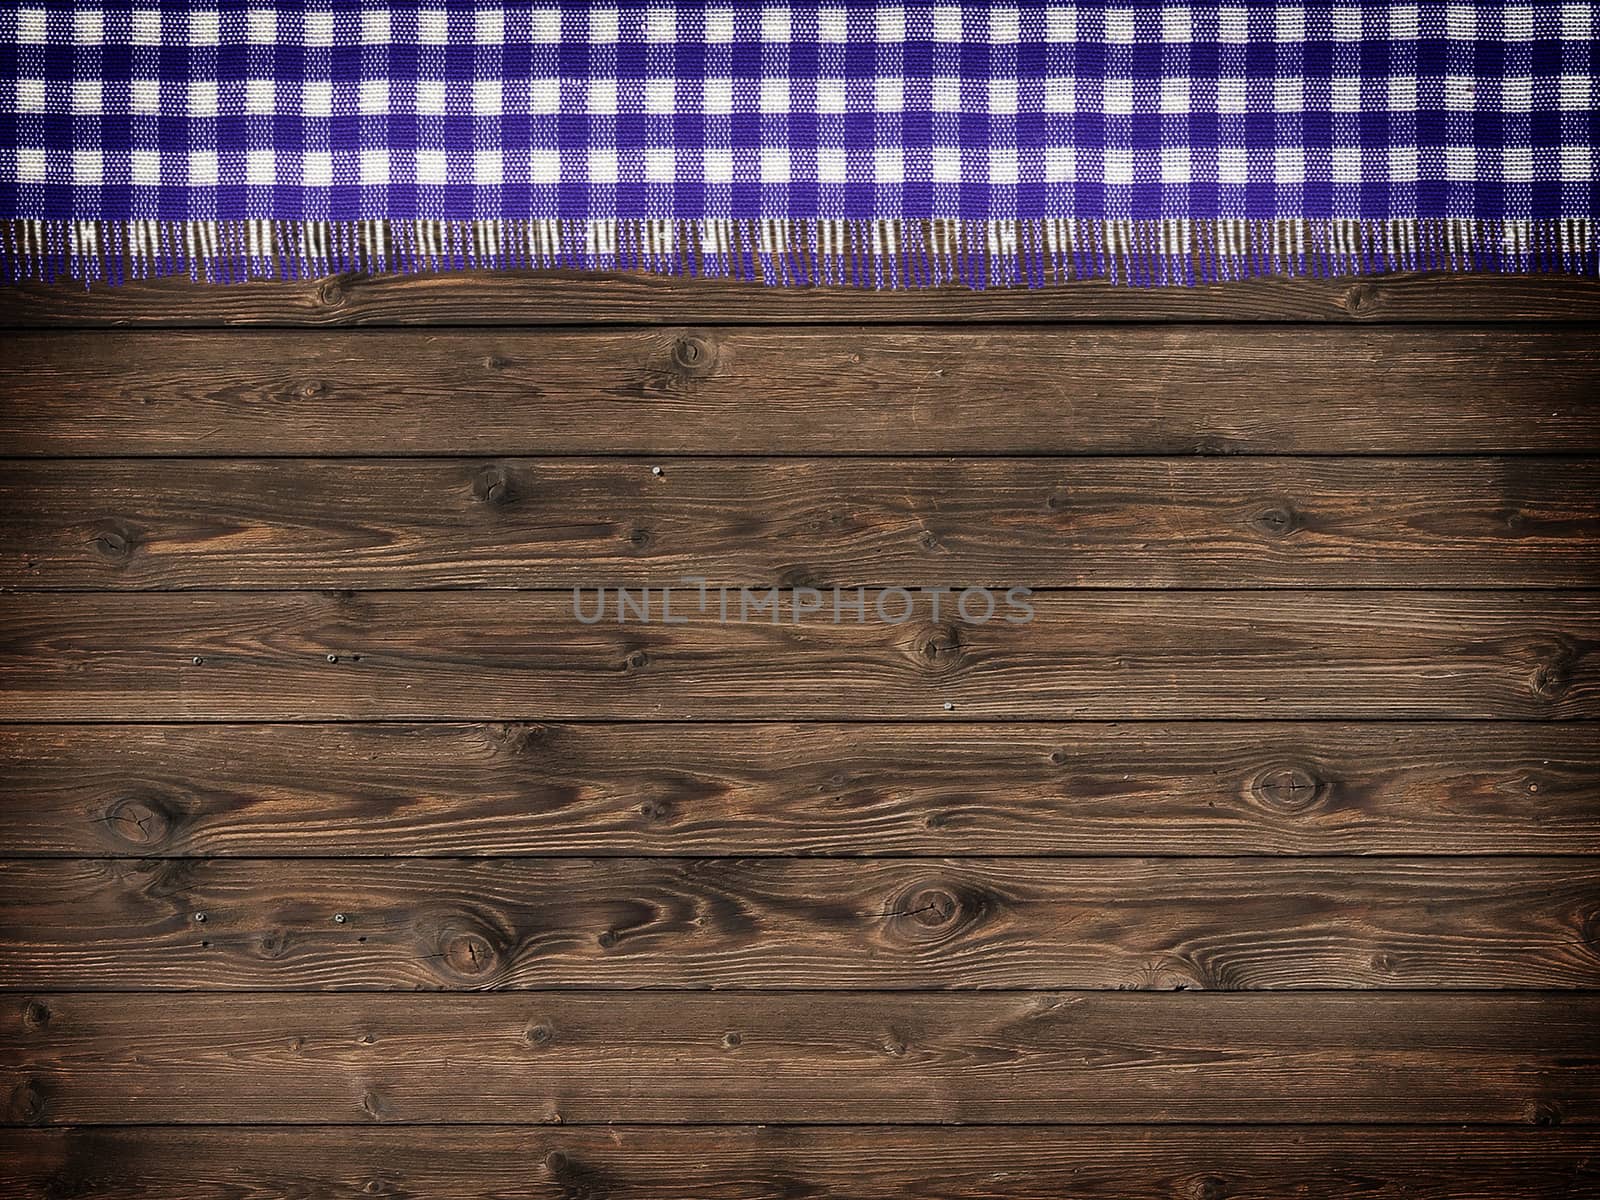 wood texture with natural pattern and a towel on top